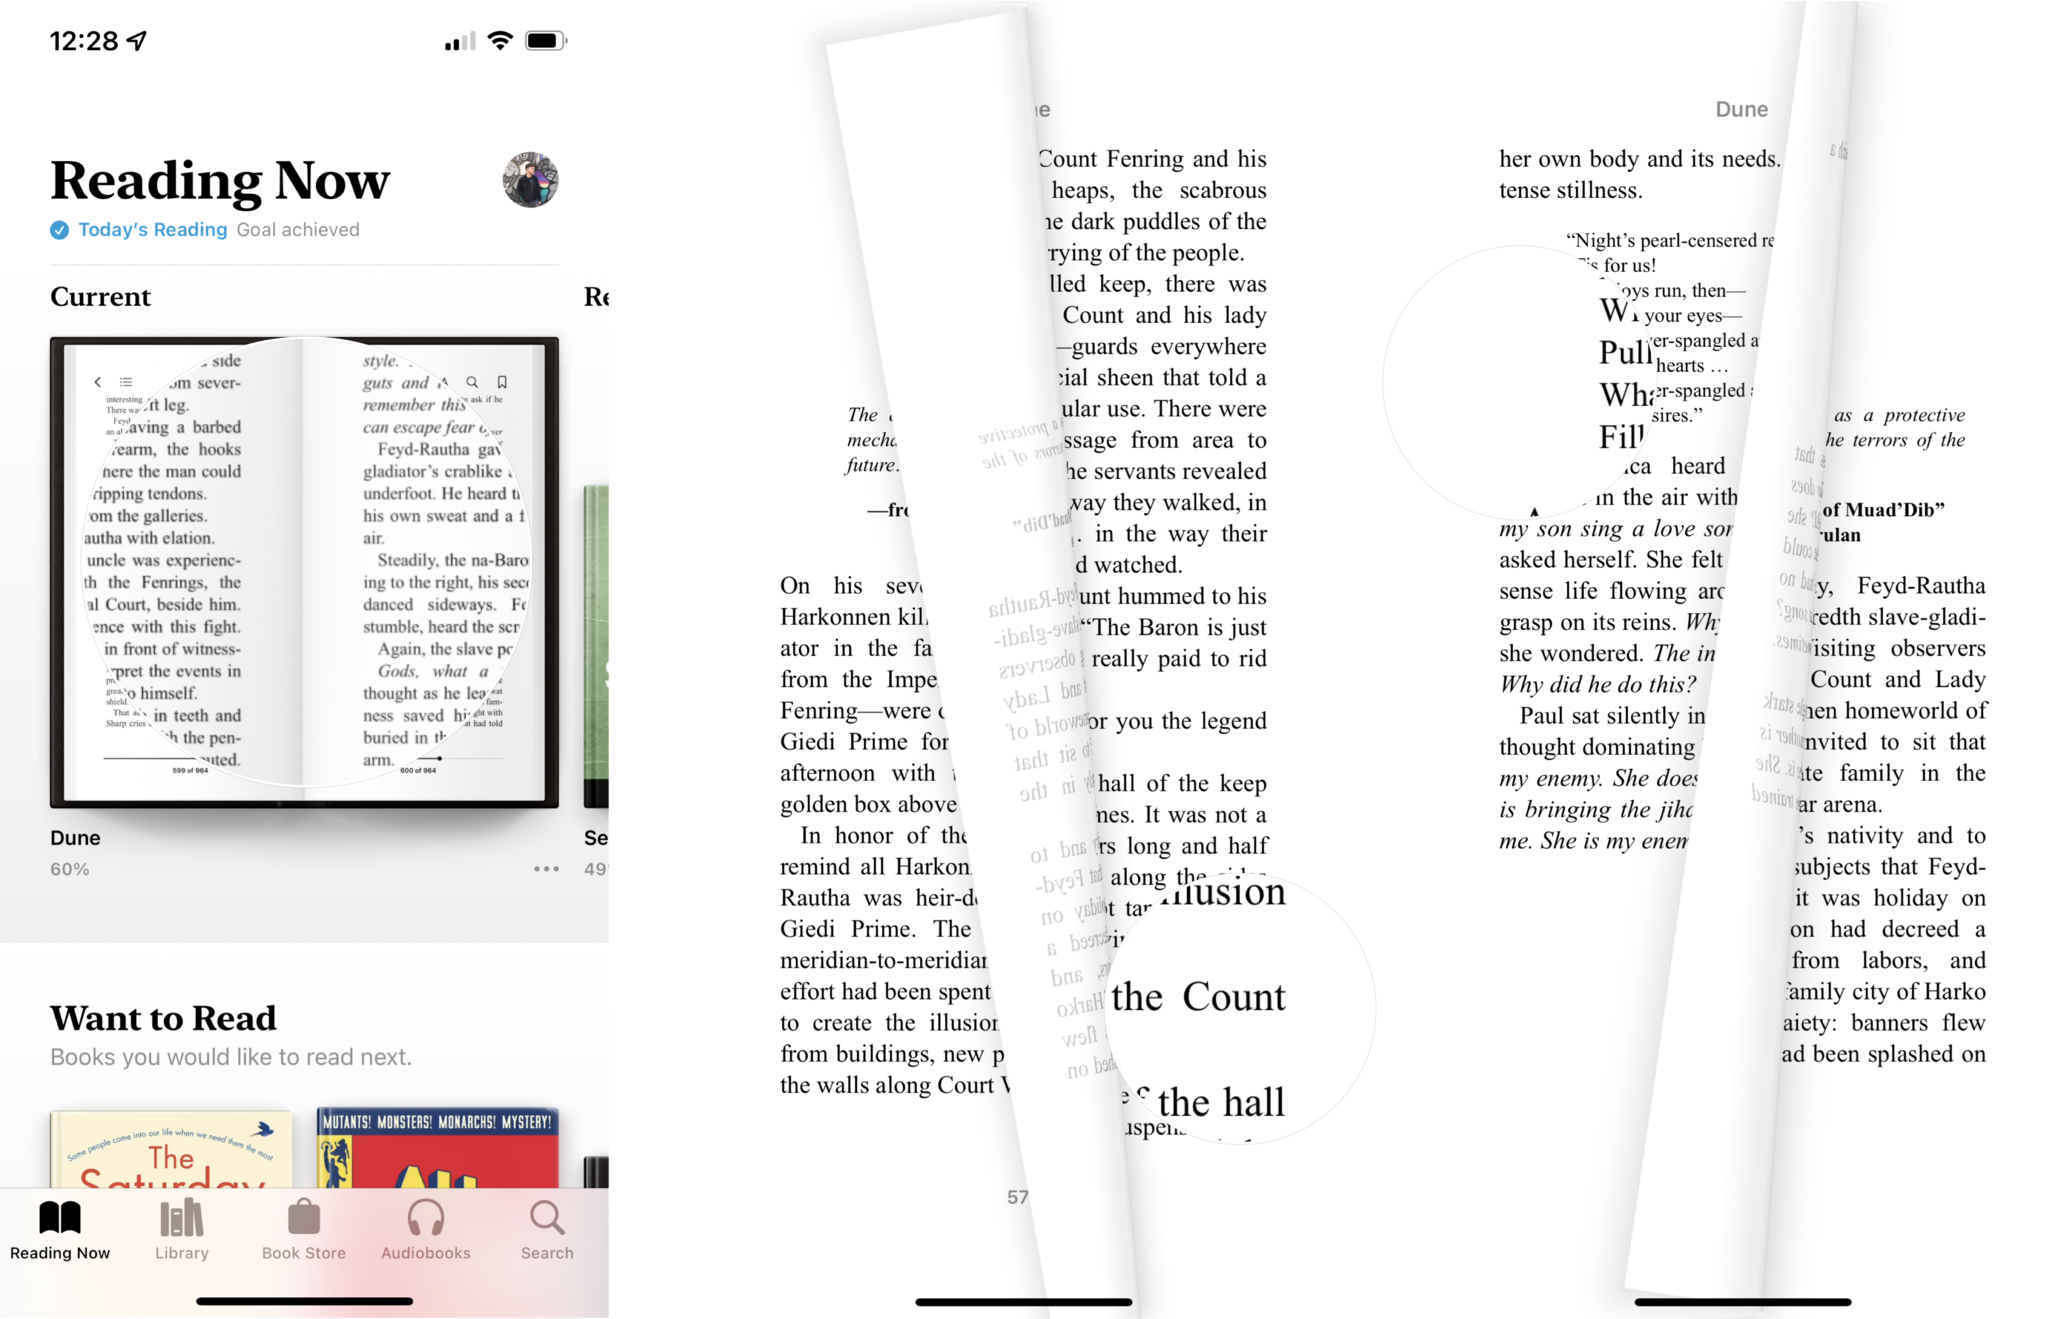 How to read a book in Apple Books: Tap a book to open it, tap the  right or left margin to navigate pages, or swipe